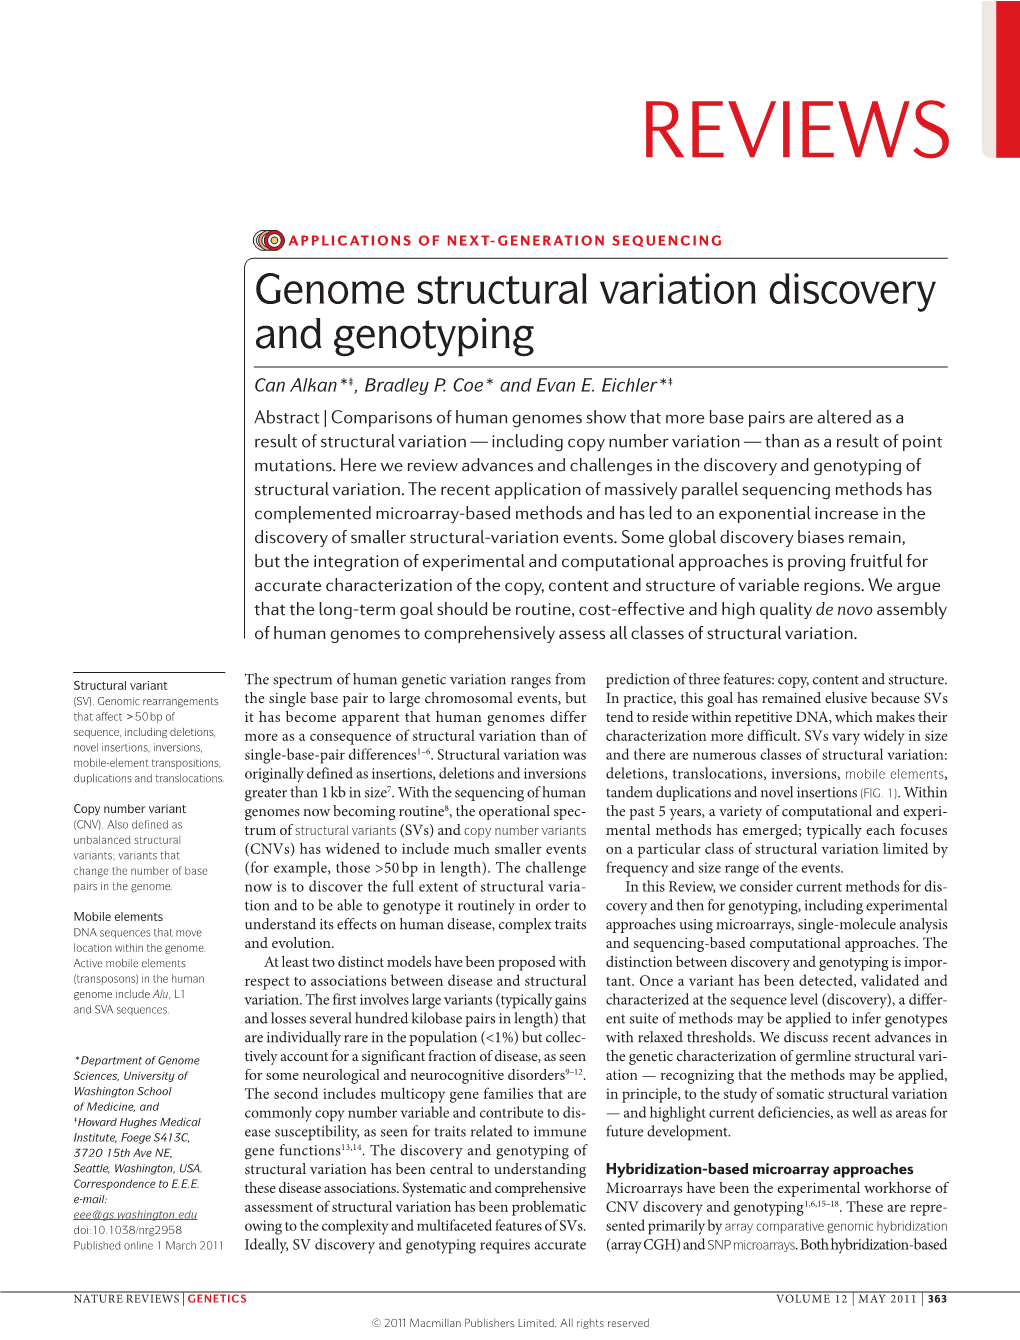 Genome Structural Variation Discovery and Genotyping